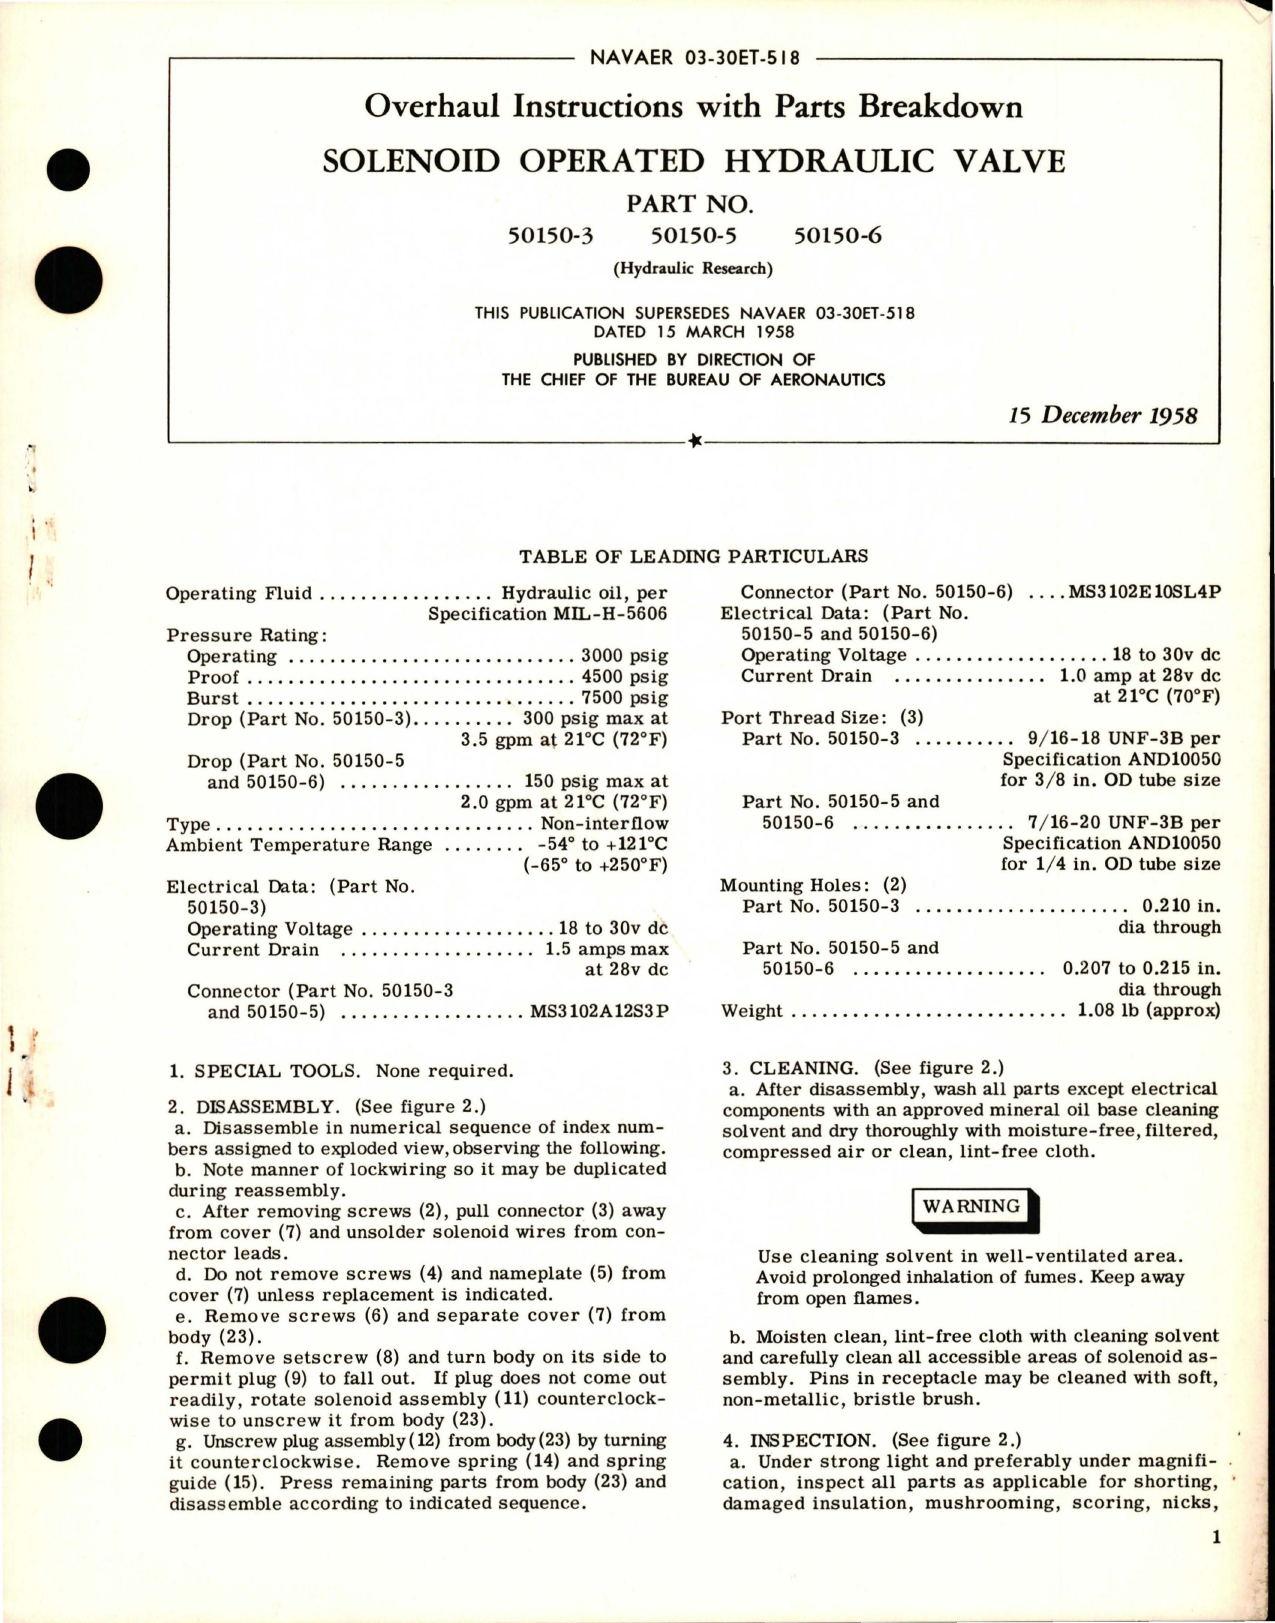 Sample page 1 from AirCorps Library document: Overhaul Instructions with Parts Breakdown for Solenoid Operated Hydraulic Valve - Parts 50150-3, 50150-5, and 50150-6 